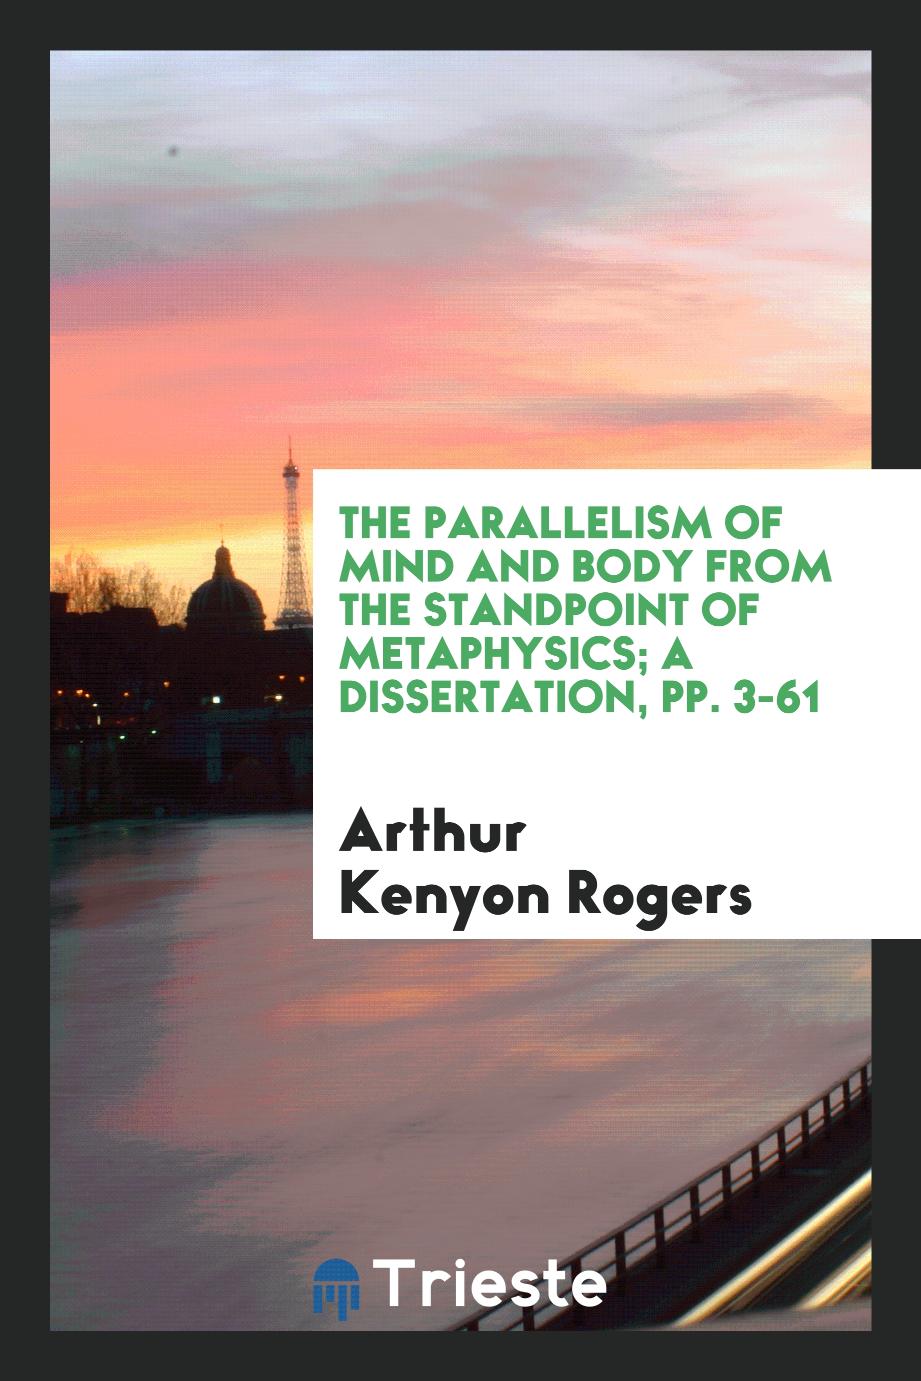 The Parallelism of Mind and Body from the Standpoint of Metaphysics; a dissertation, pp. 3-61